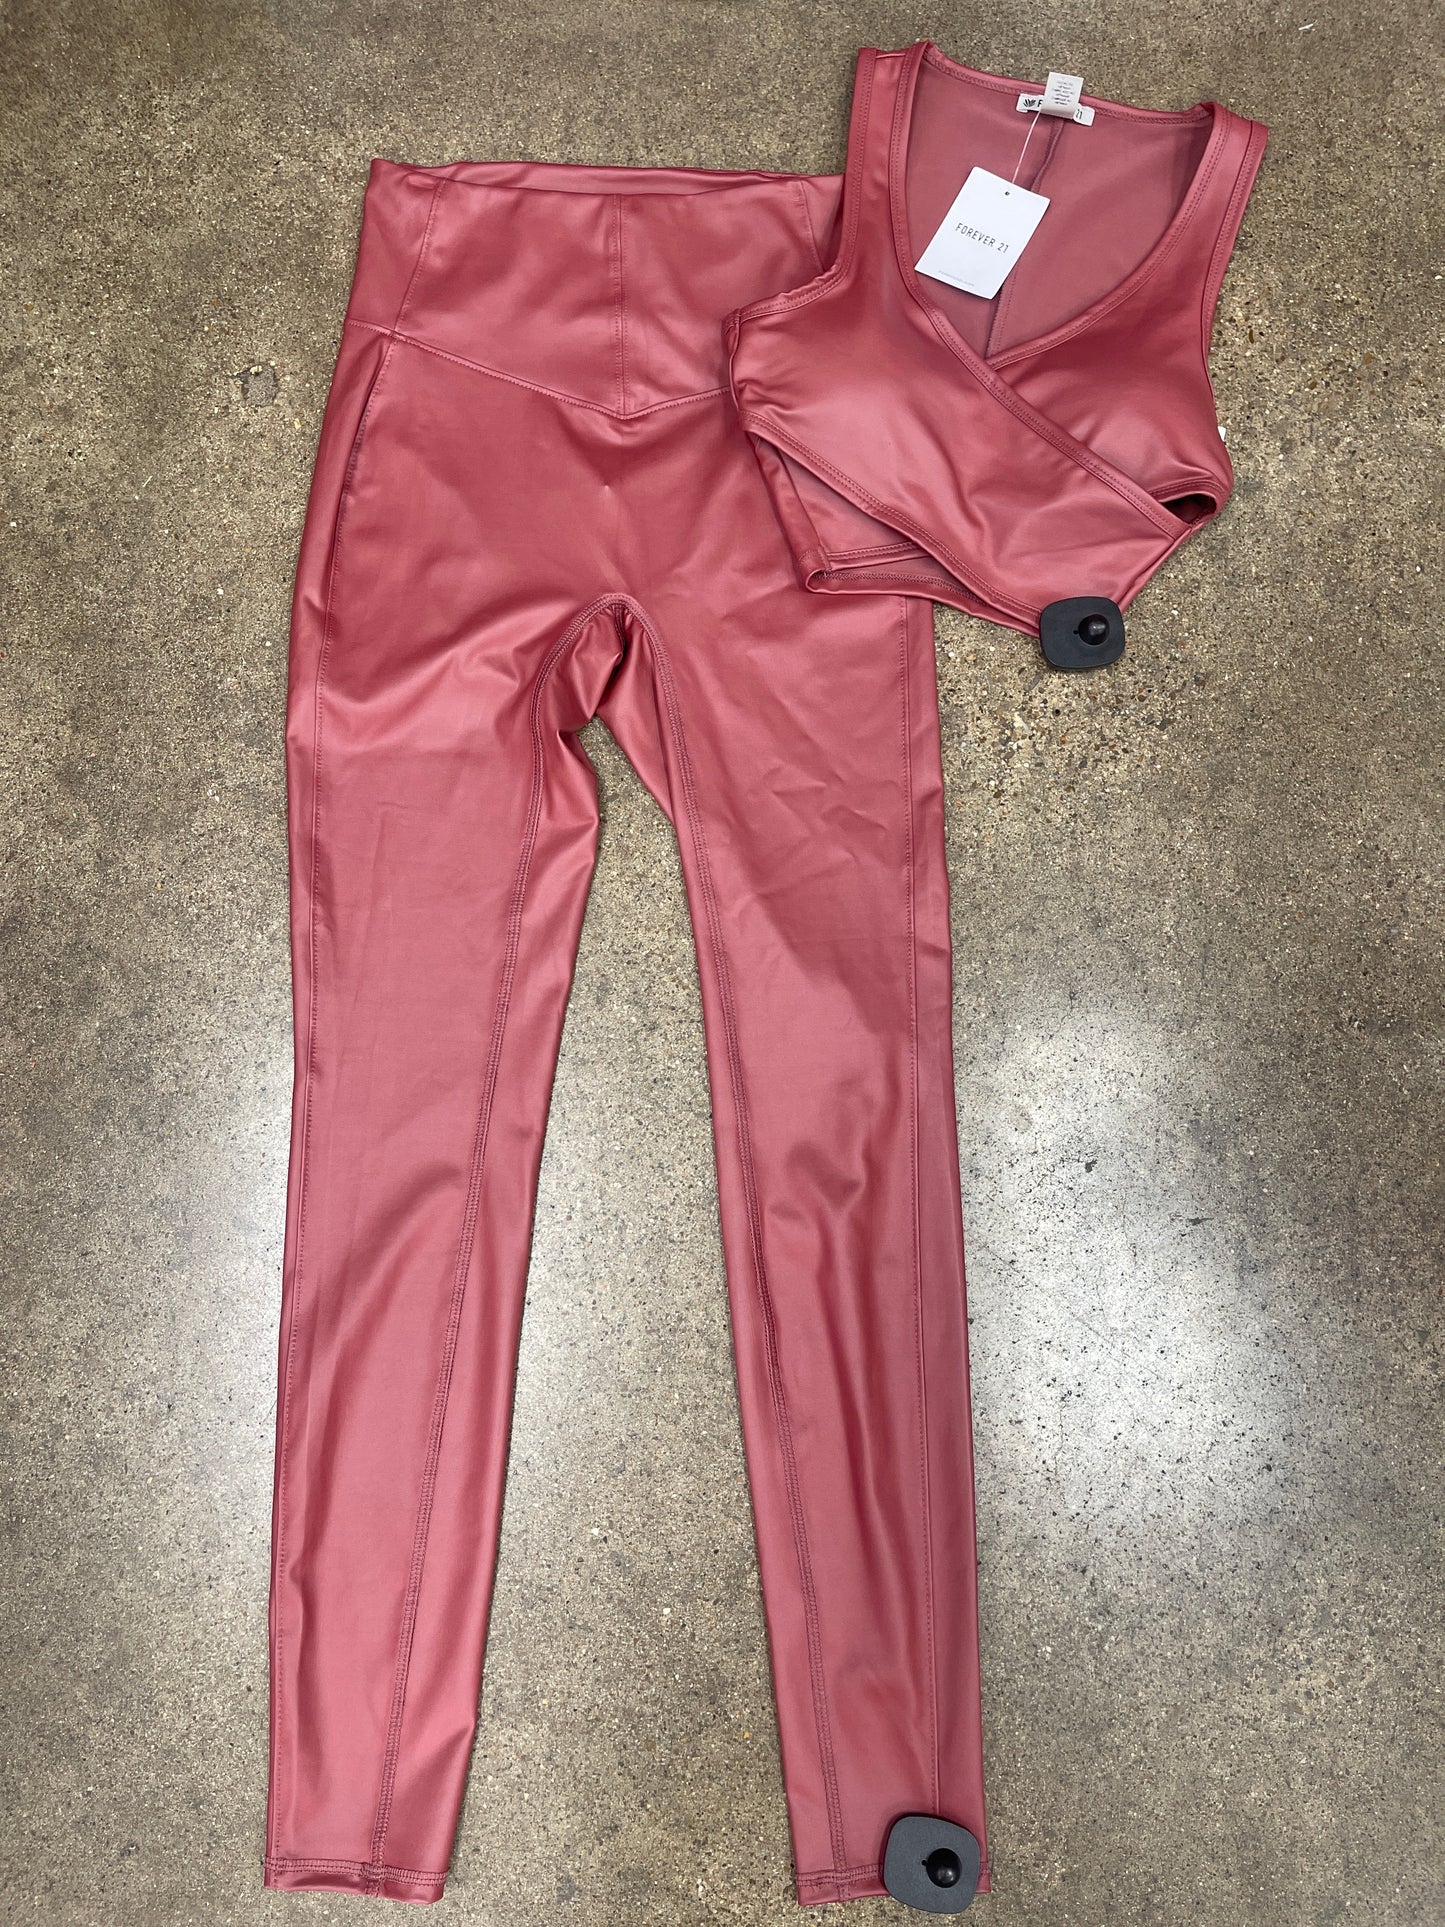 Red Athletic Pants 2pc Forever 21, Size S